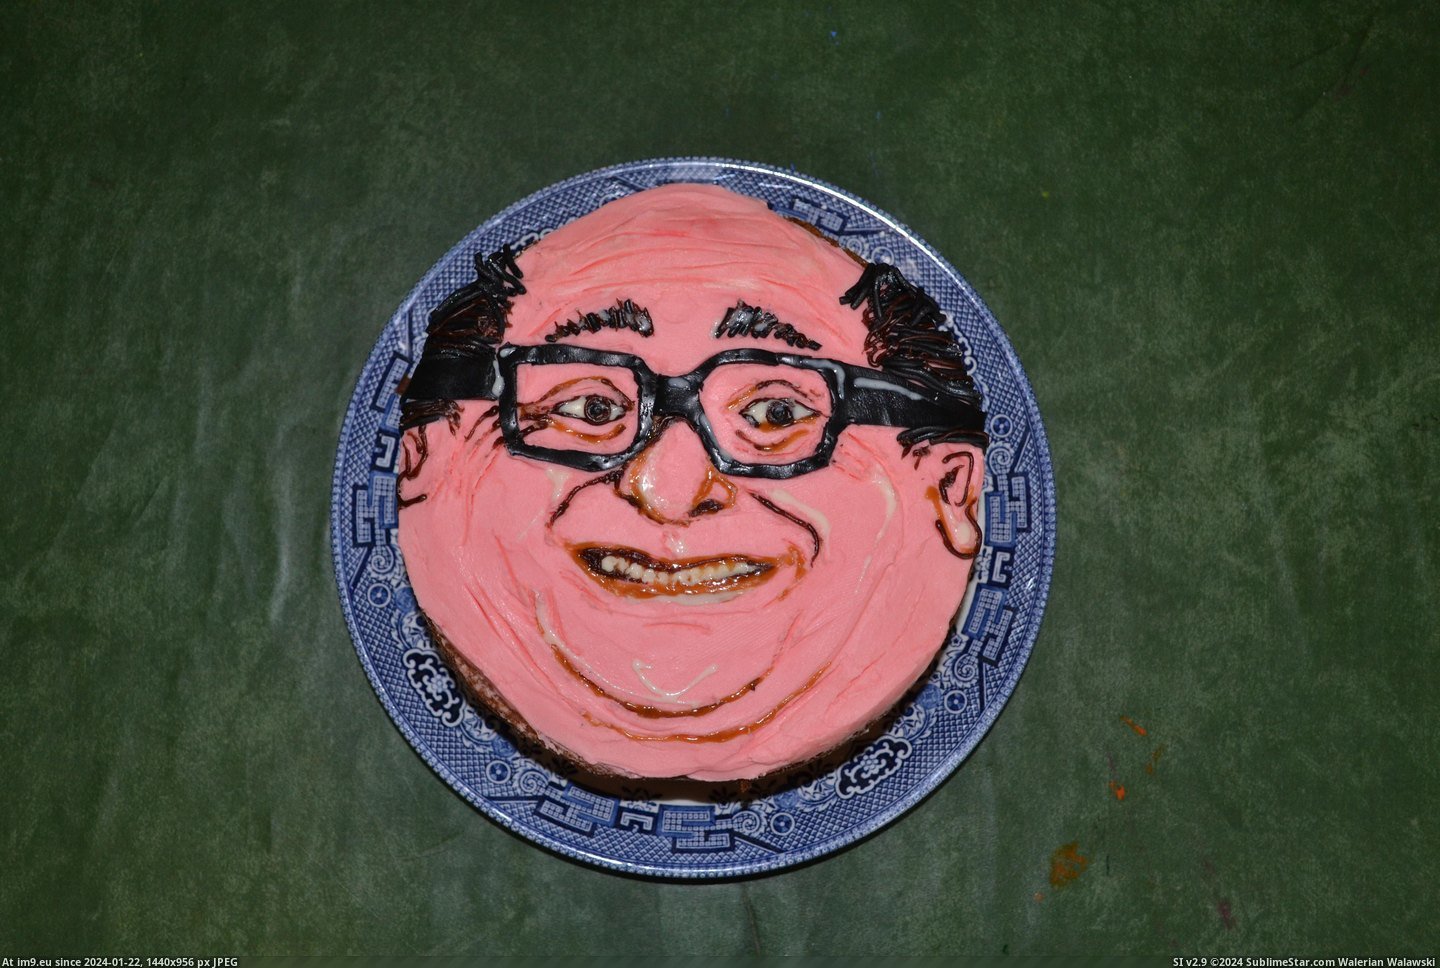 #Face #Sister #Did #Obsession #Danny #Unhealthy #Devito #Cake #Birthday #Asked [Pics] My sister has an unhealthy obsession with Danny DeVito and asked for a birthday cake of his face - I did my best. Pic. (Изображение из альбом My r/PICS favs))